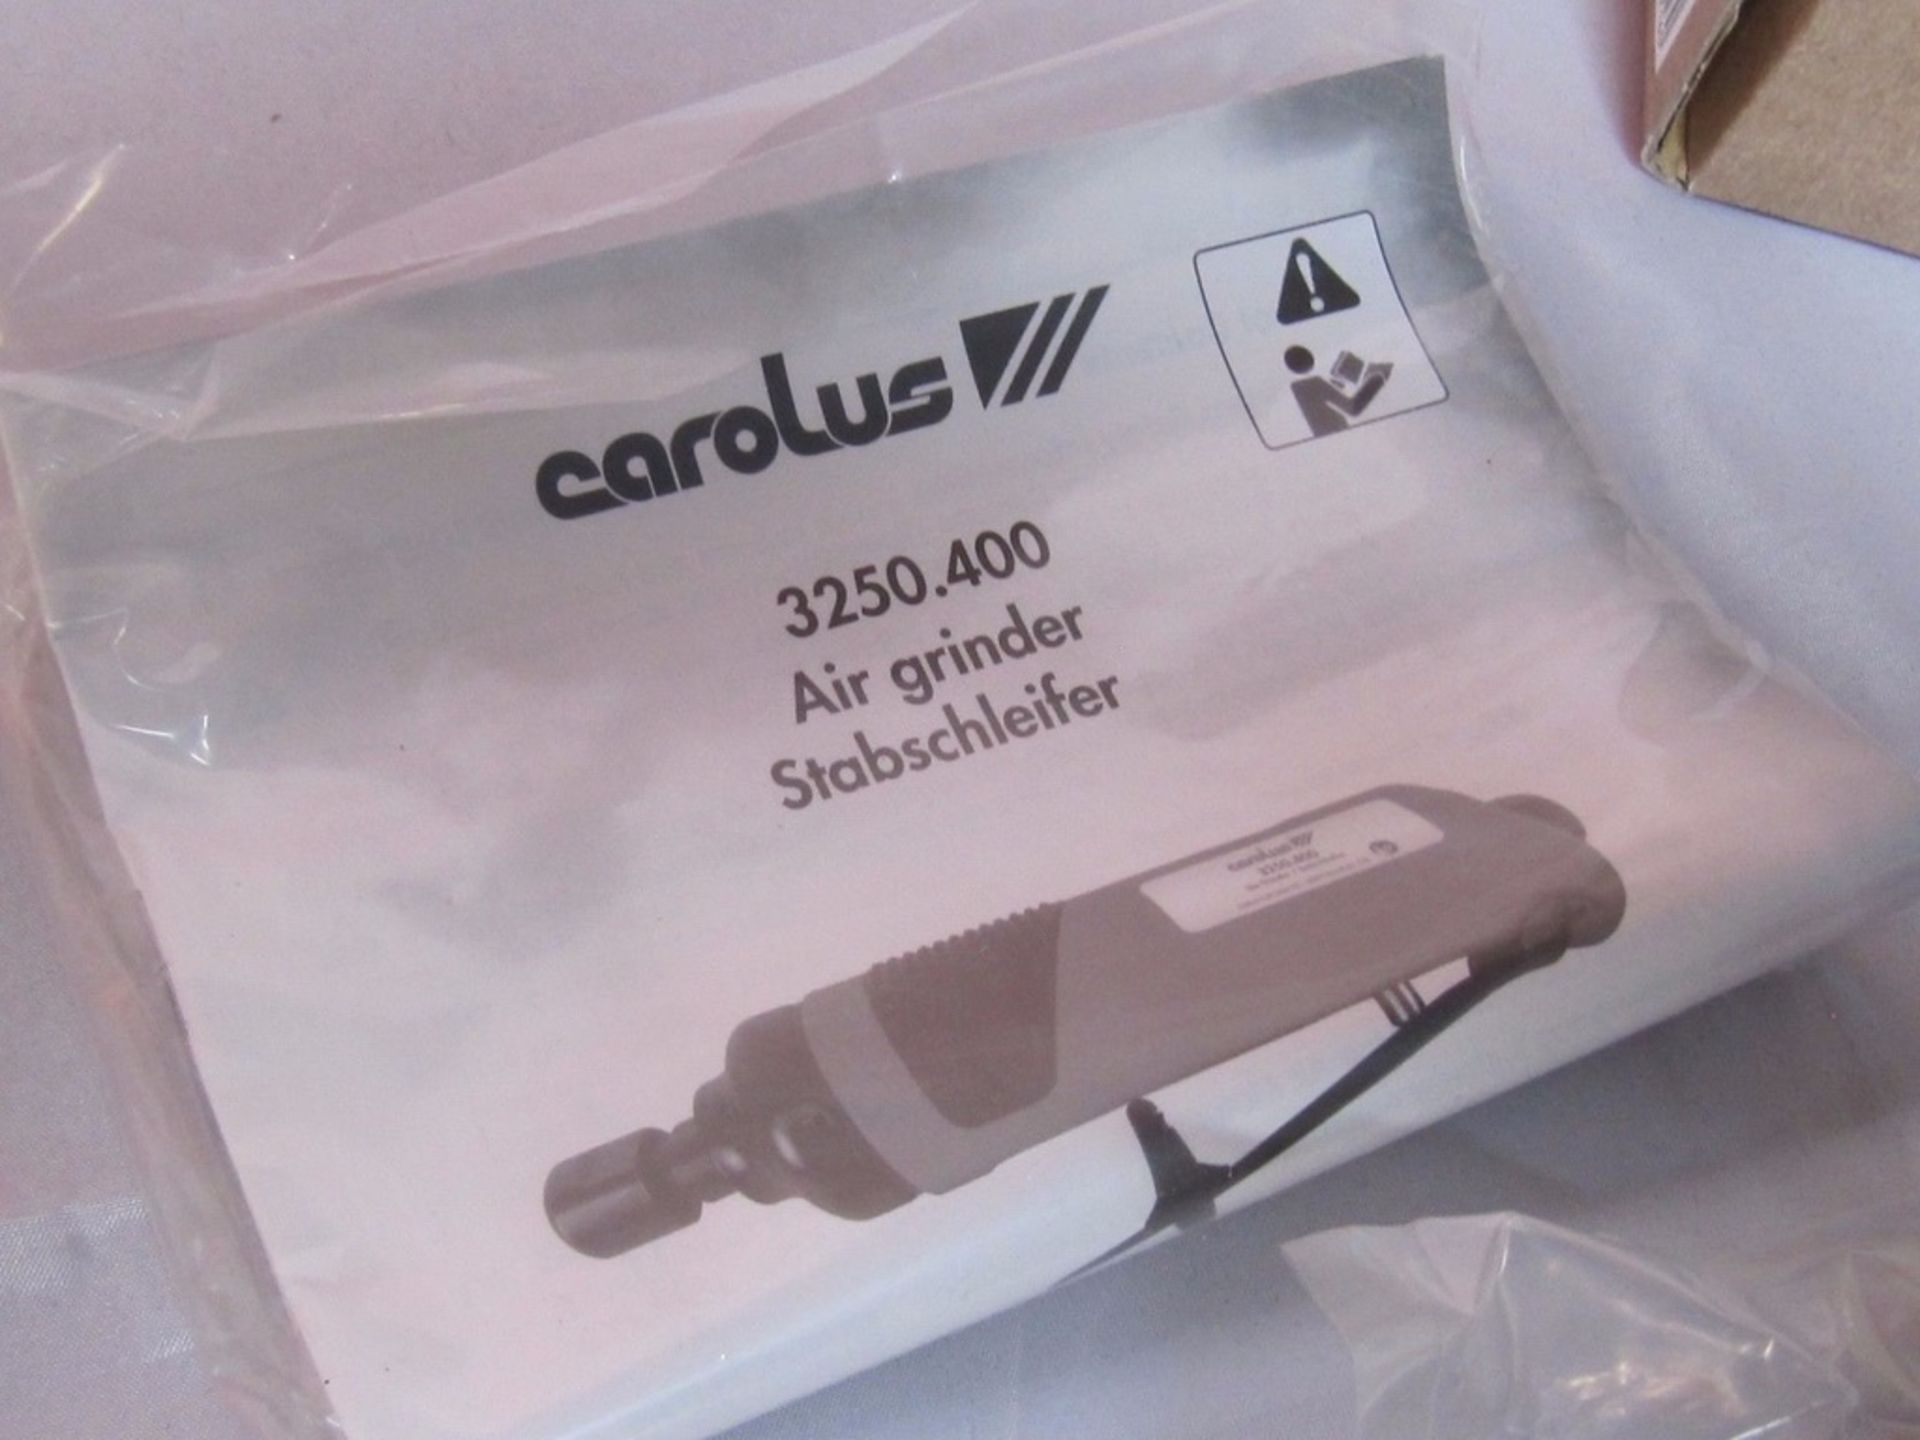 Carolus Air Grinder. 3250.400 no vat on hammer.You will get 1 of these.Brand new and unused. - Image 3 of 4